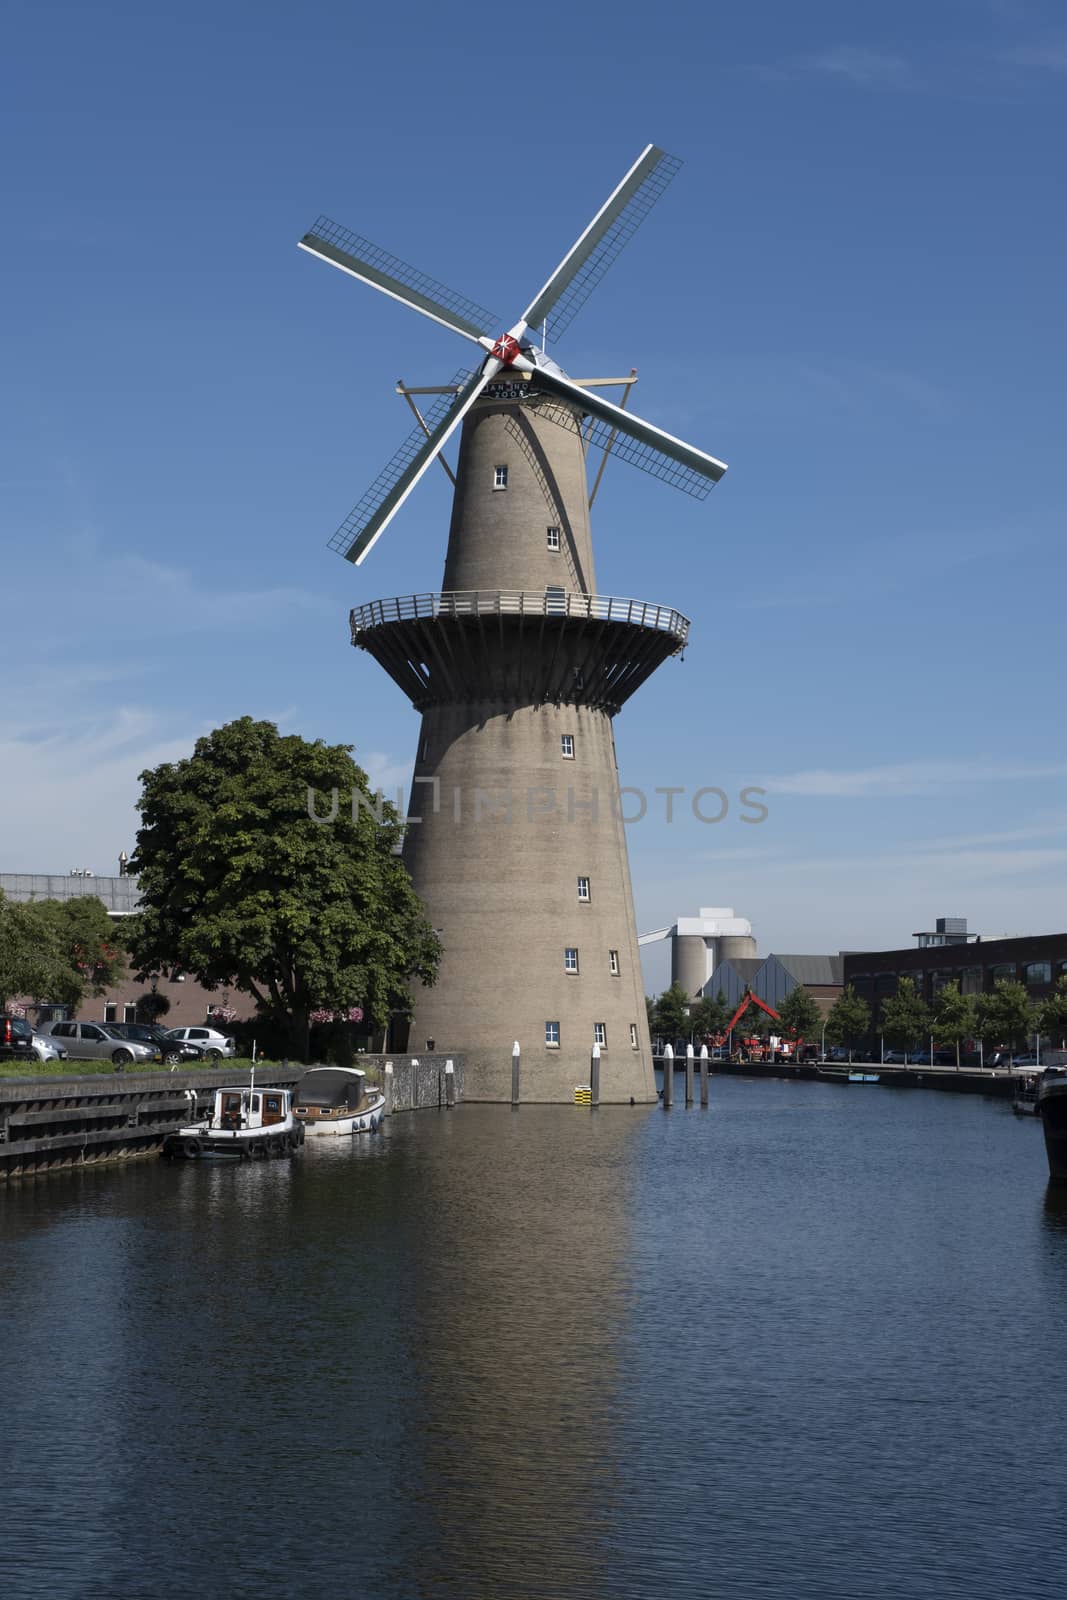 Large Dutch early Industrial Revolution windmill in Schiedam, the Netherlands